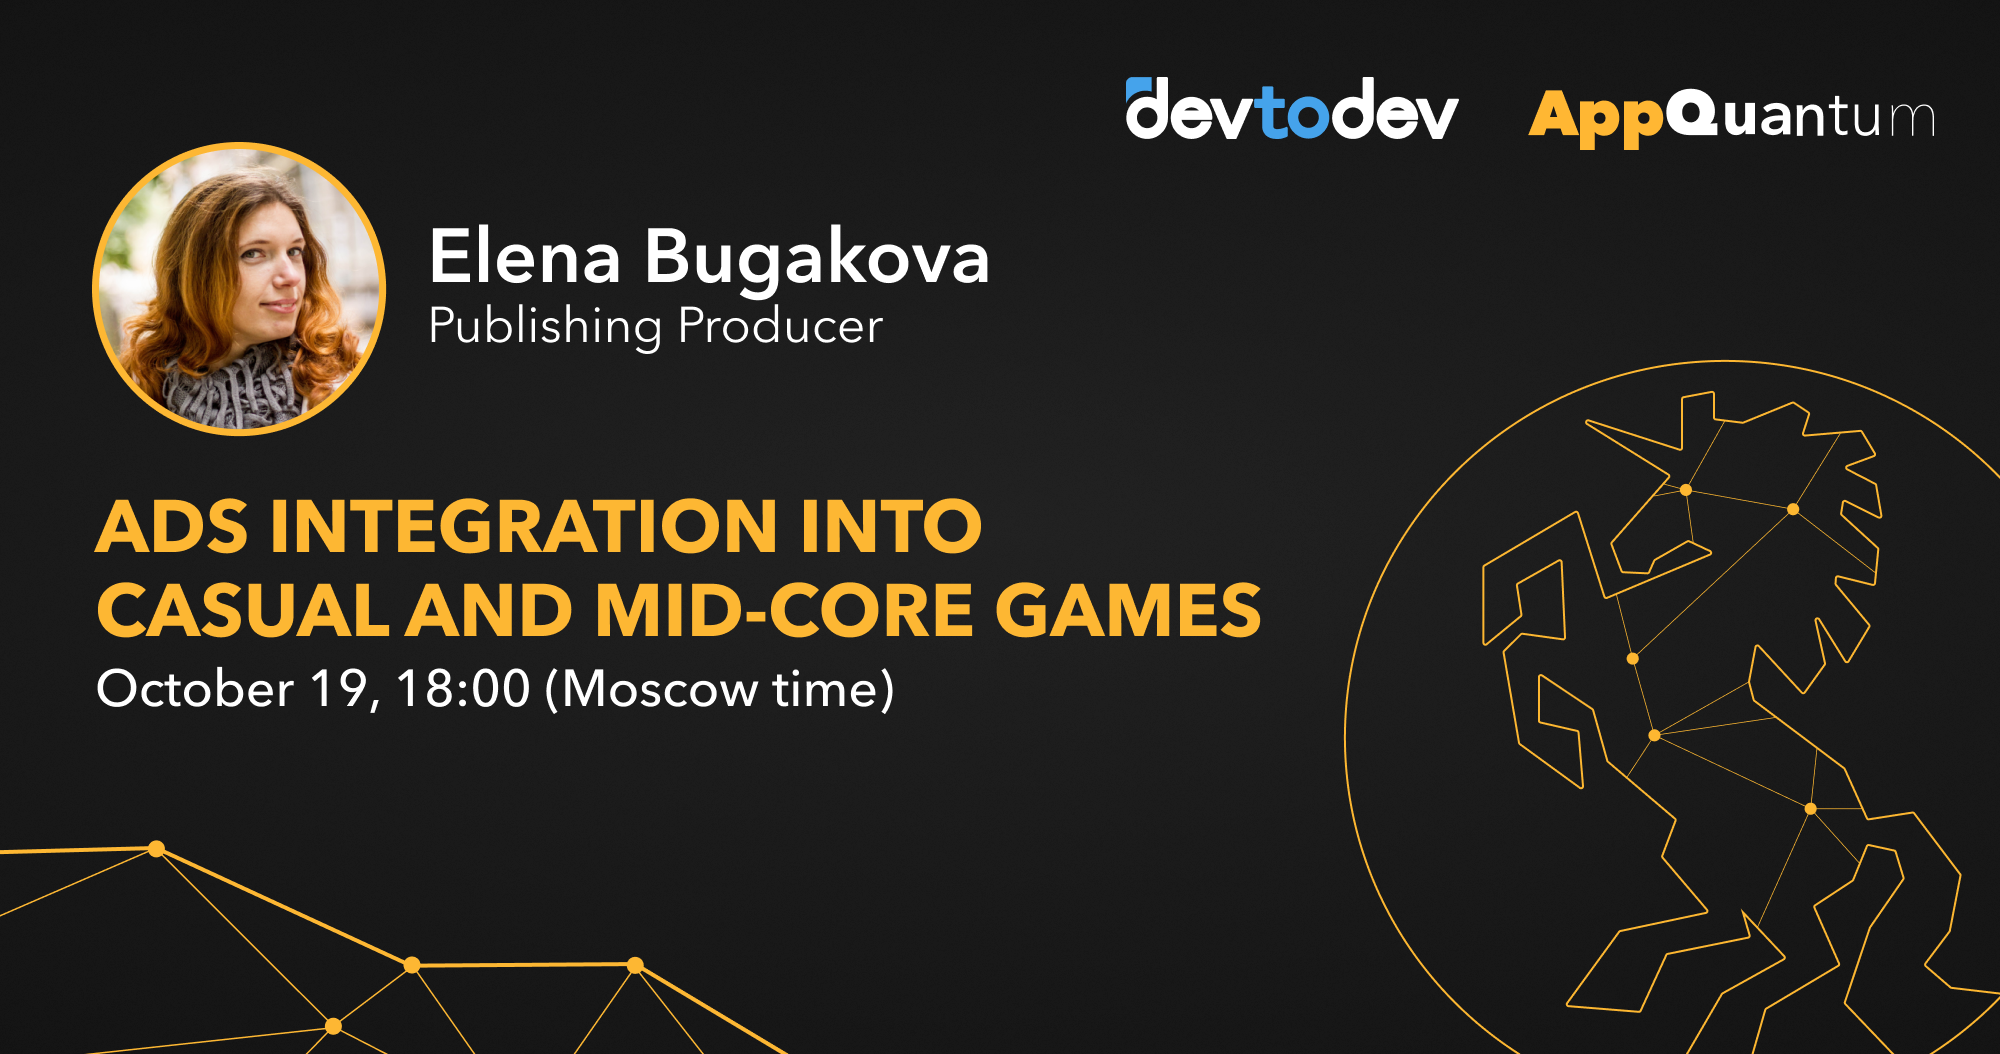 Webinar About Ads Integration Into Casual and Mid-Core Mobile Games with Elena Bugakova